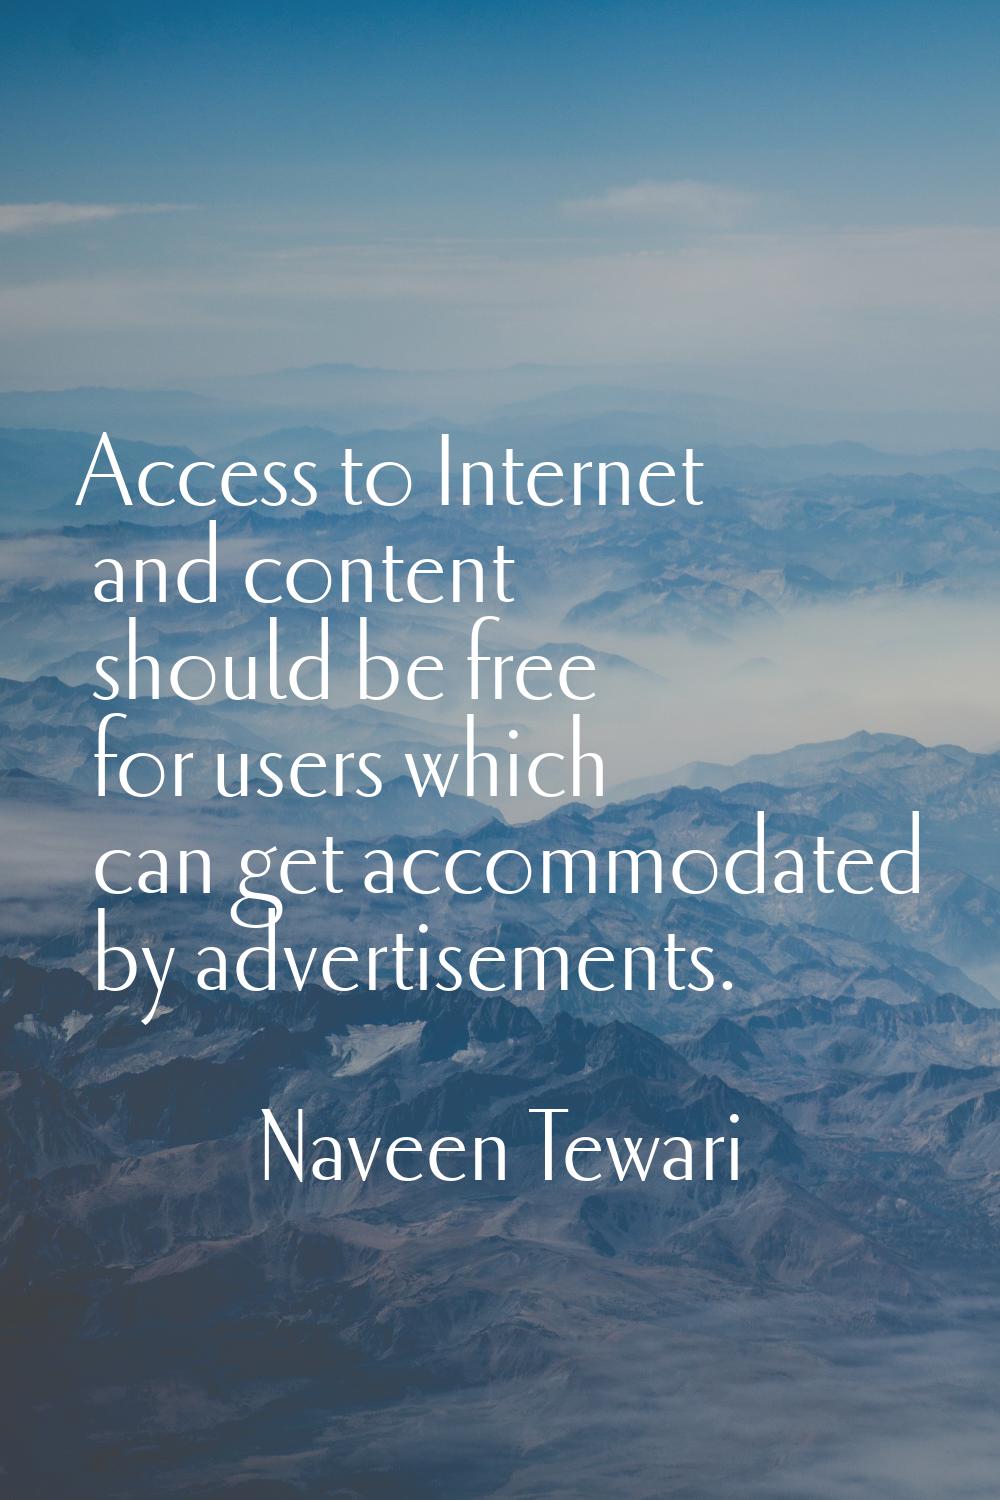 Access to Internet and content should be free for users which can get accommodated by advertisement